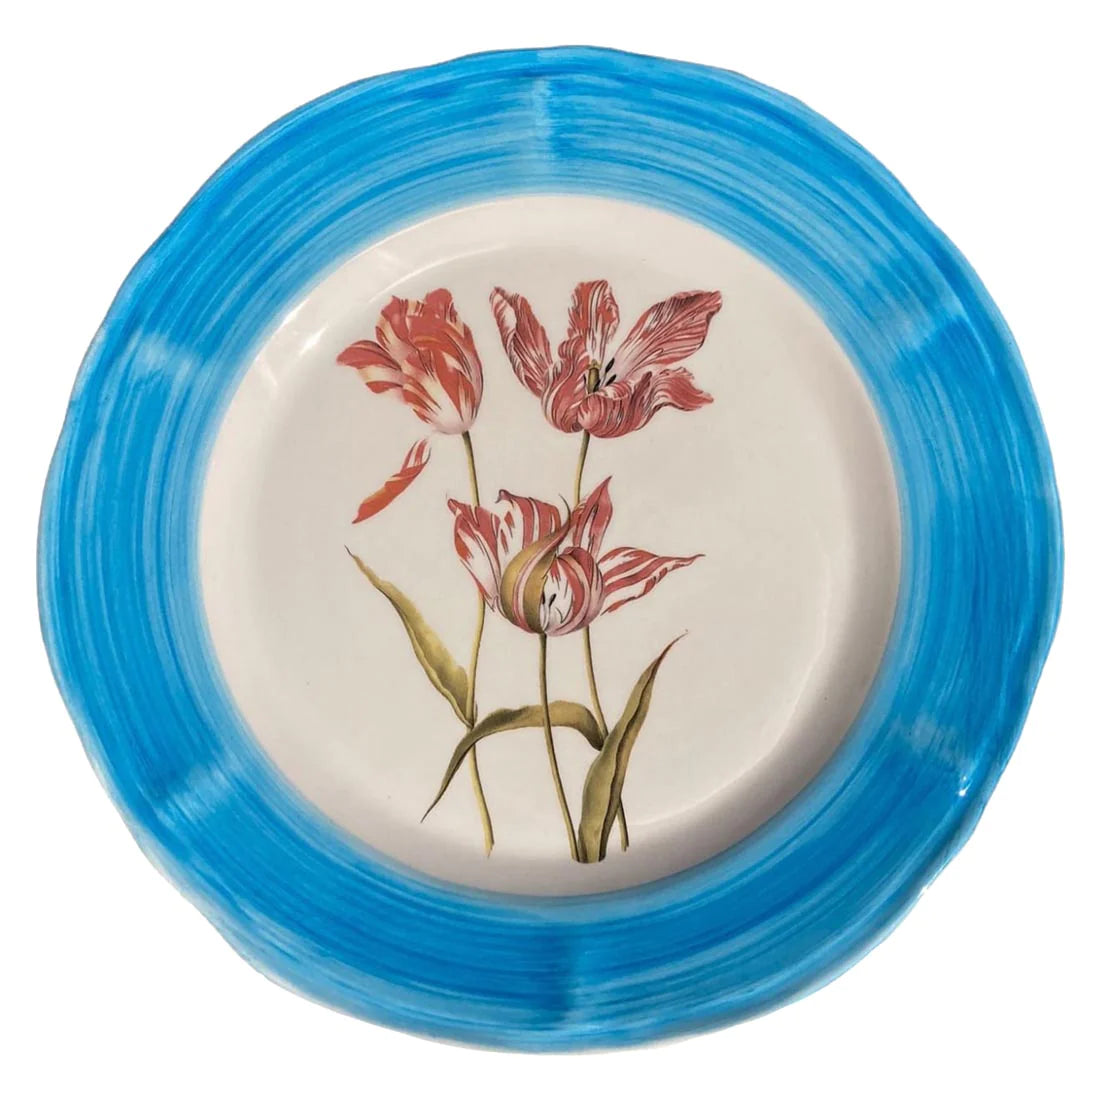 A ceramic plate with a bright blue hand painted rim and a flower motif in the centre.